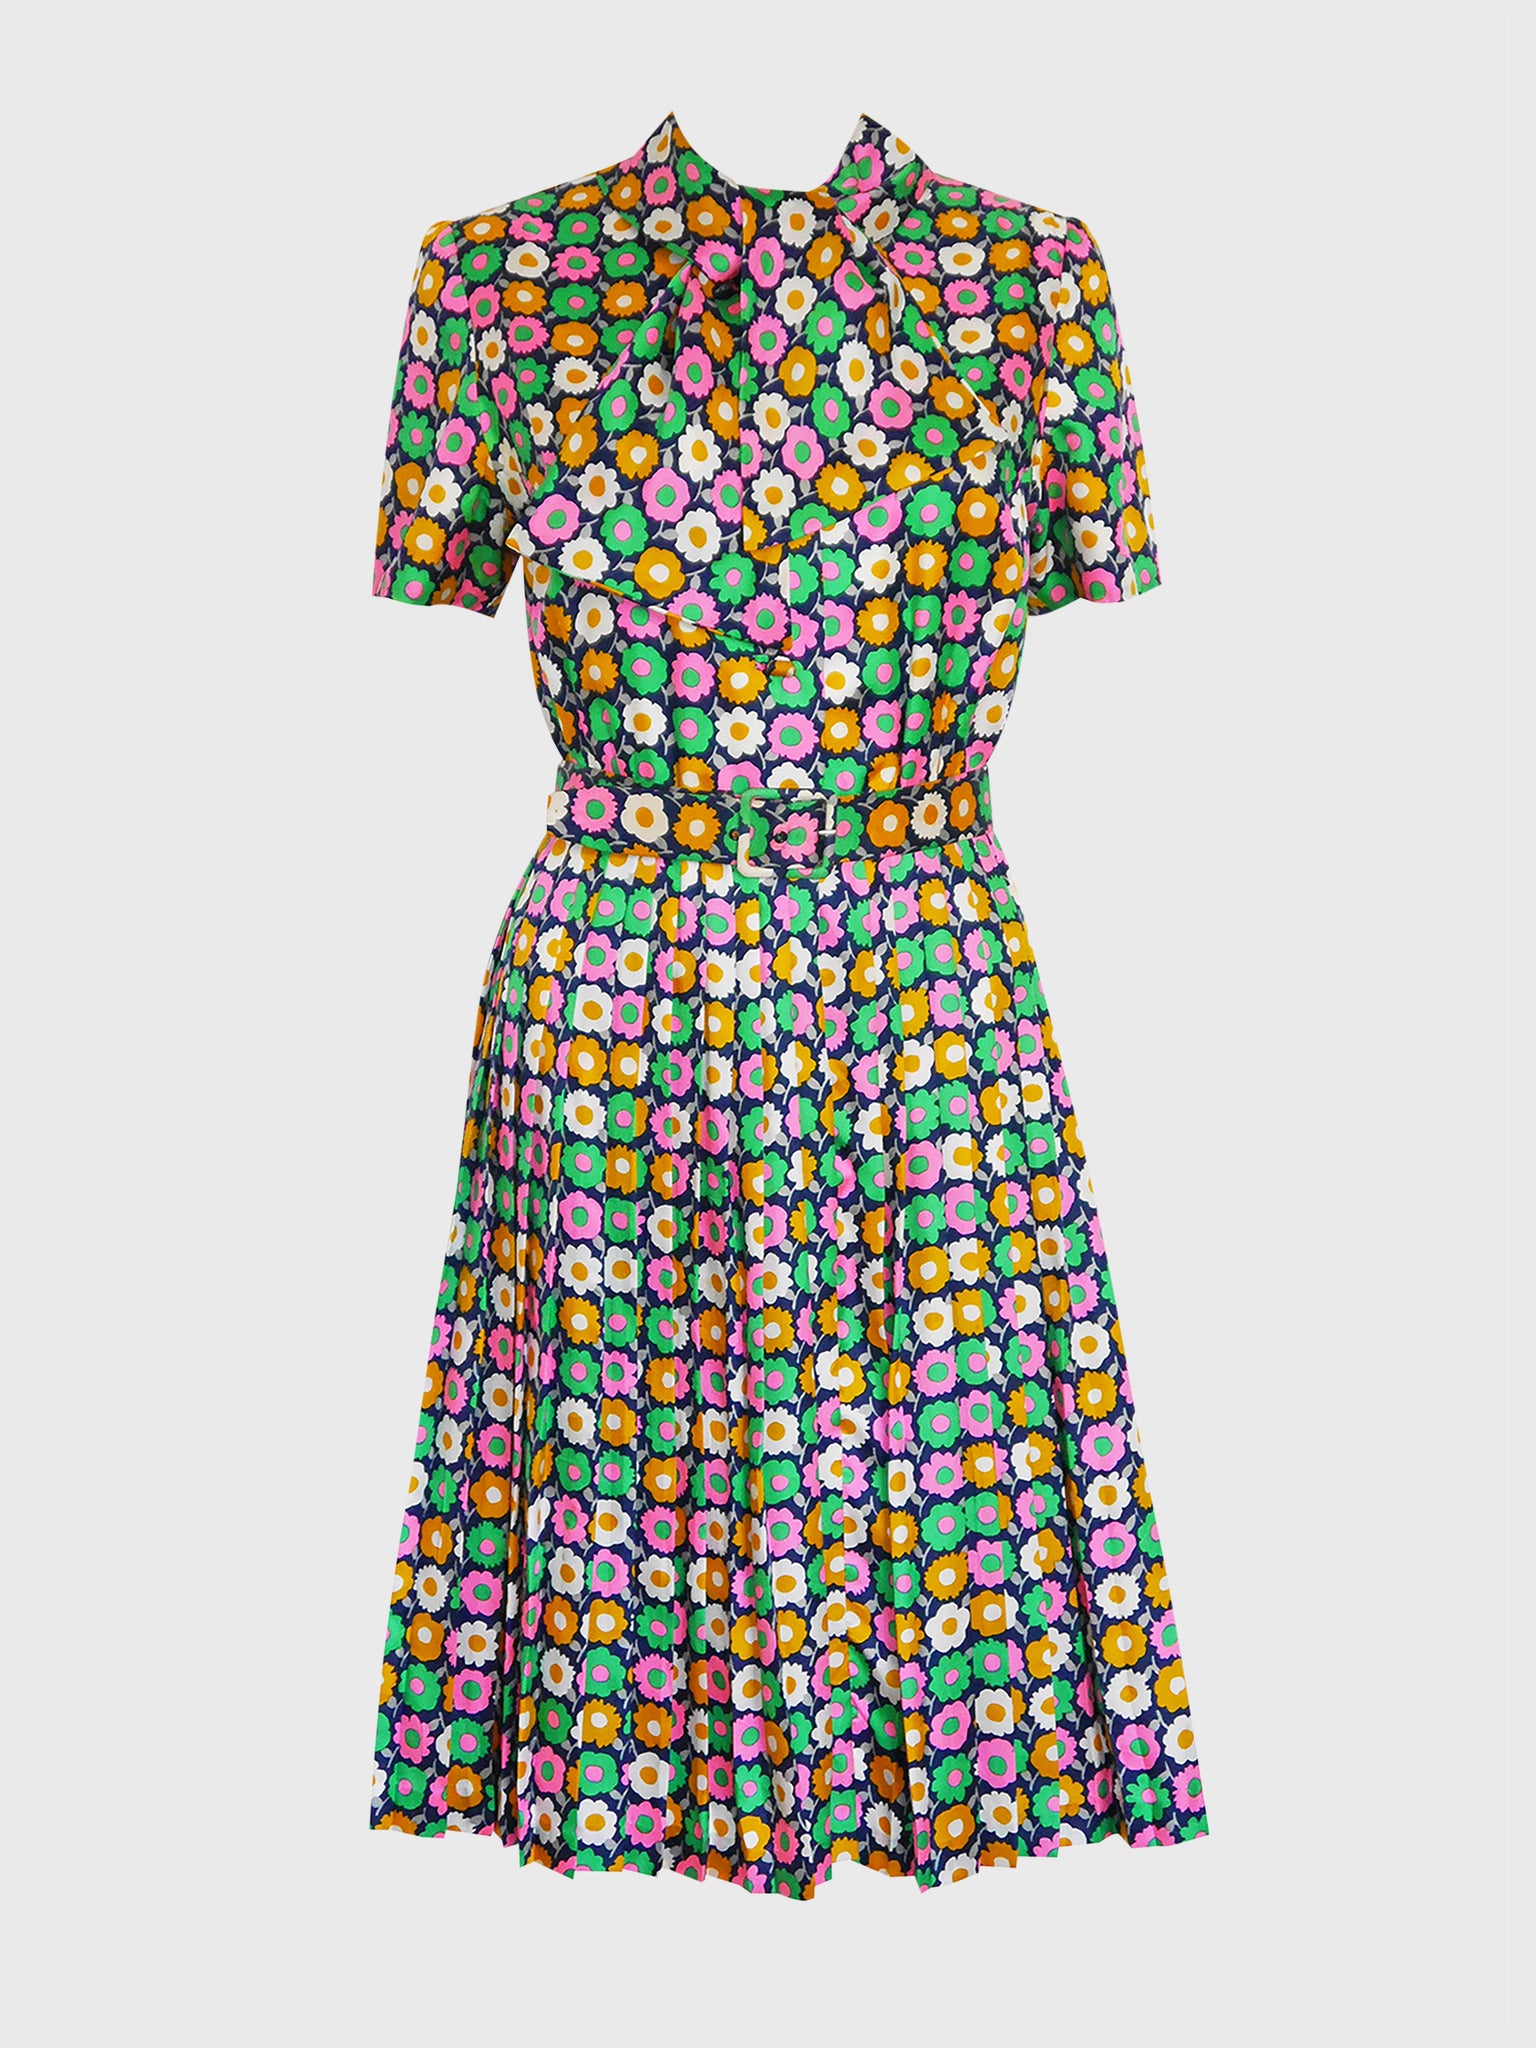 NINA RICCI Haute Couture 1970s Belted Graphic Print Silk Day Dress